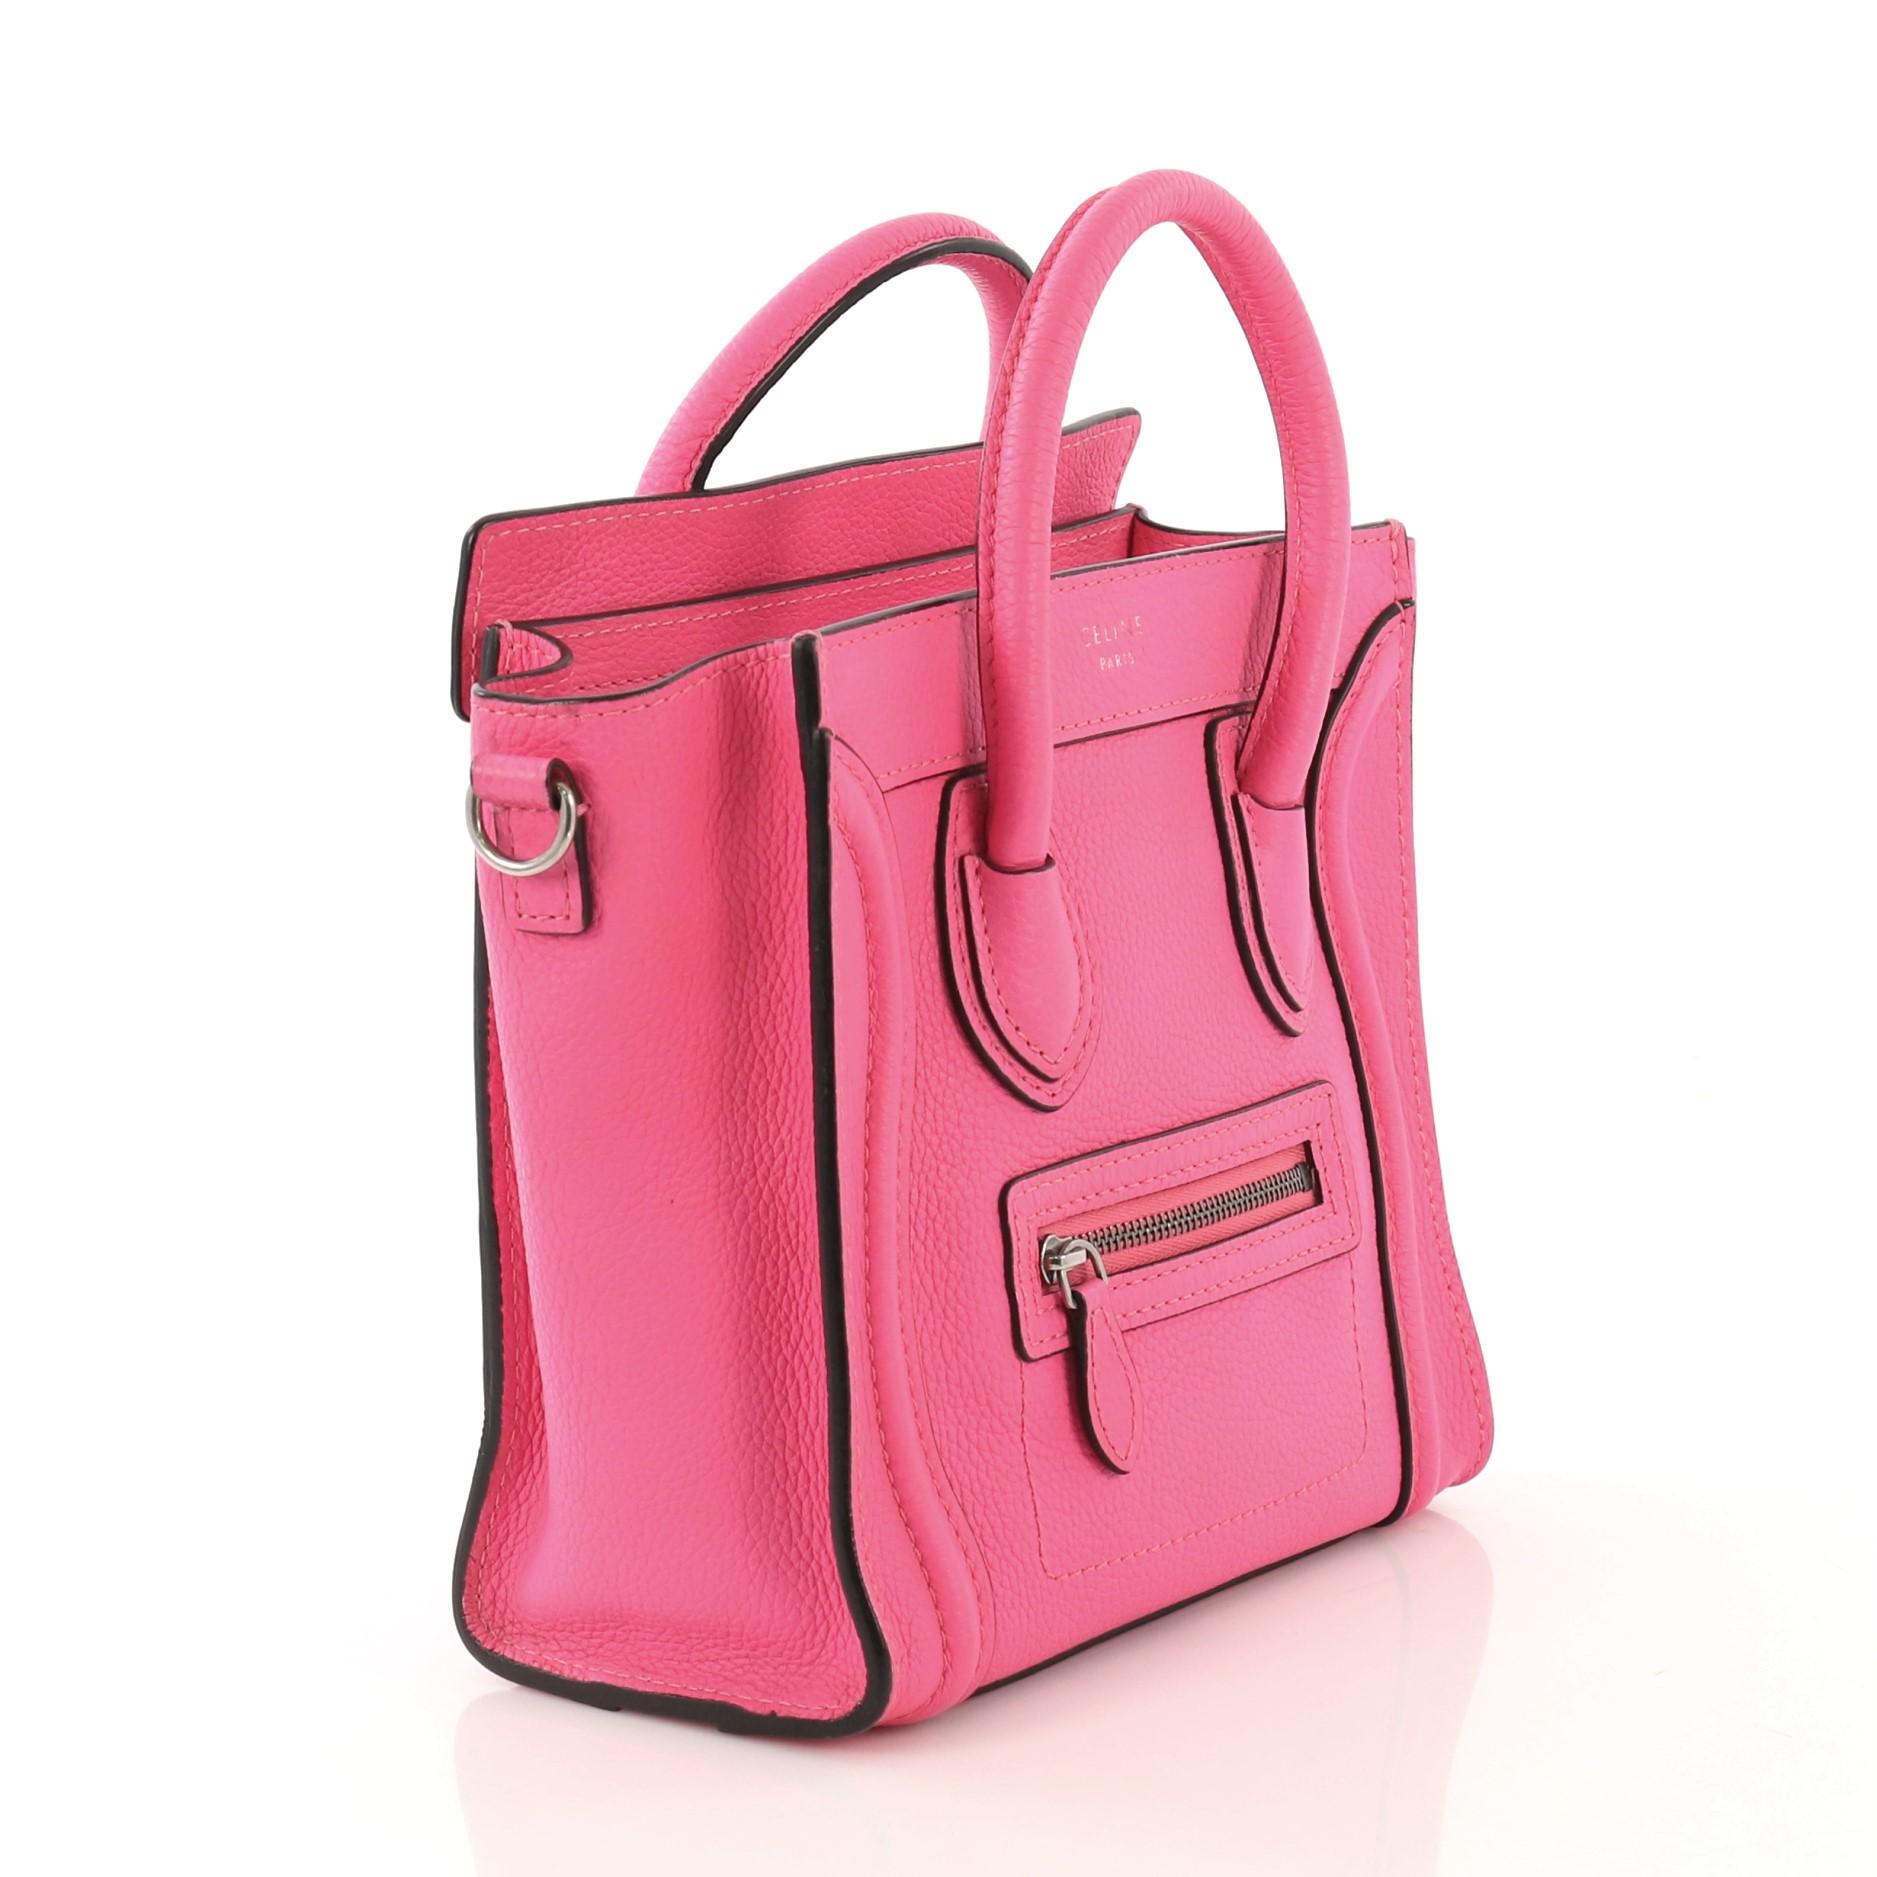 This Celine Luggage Handbag Grainy Leather Nano, crafted in hot pink grainy leather, features dual rolled leather handles, front zip pocket, and silver-tone hardware. Its zip closure opens to a pink microfiber interior with zip and slip pockets.